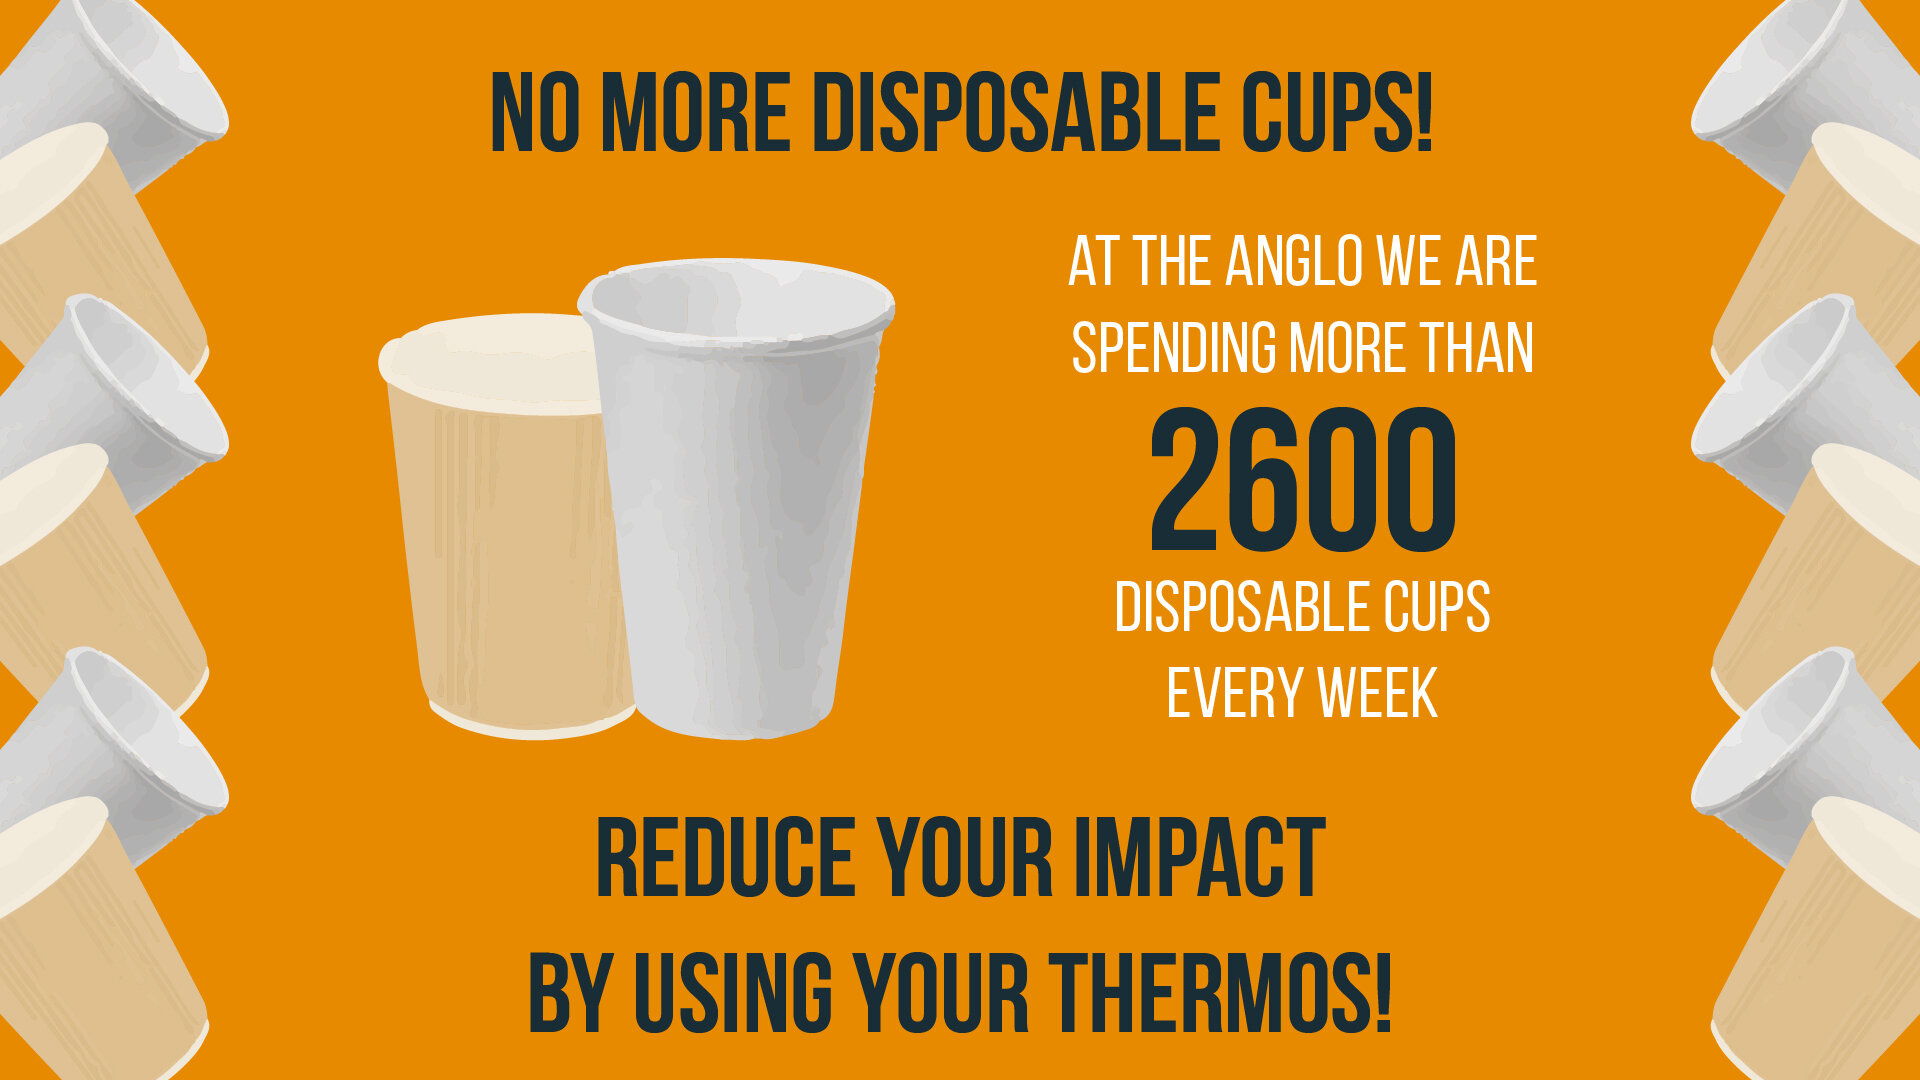 No more disposable cups (1).jpg